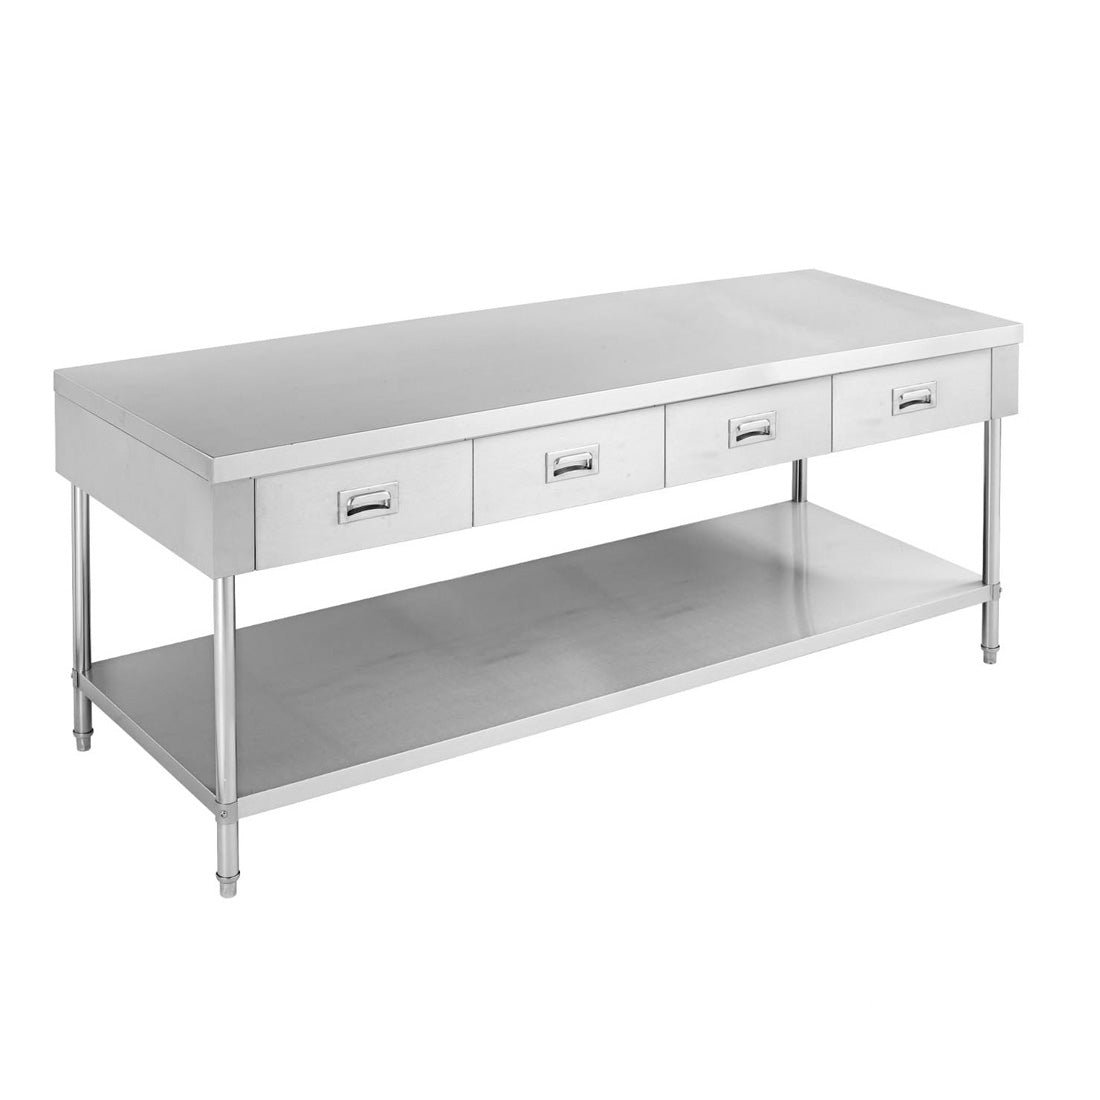 SWBD-7-1800 Work bench with 4 Drawers and Undershelf